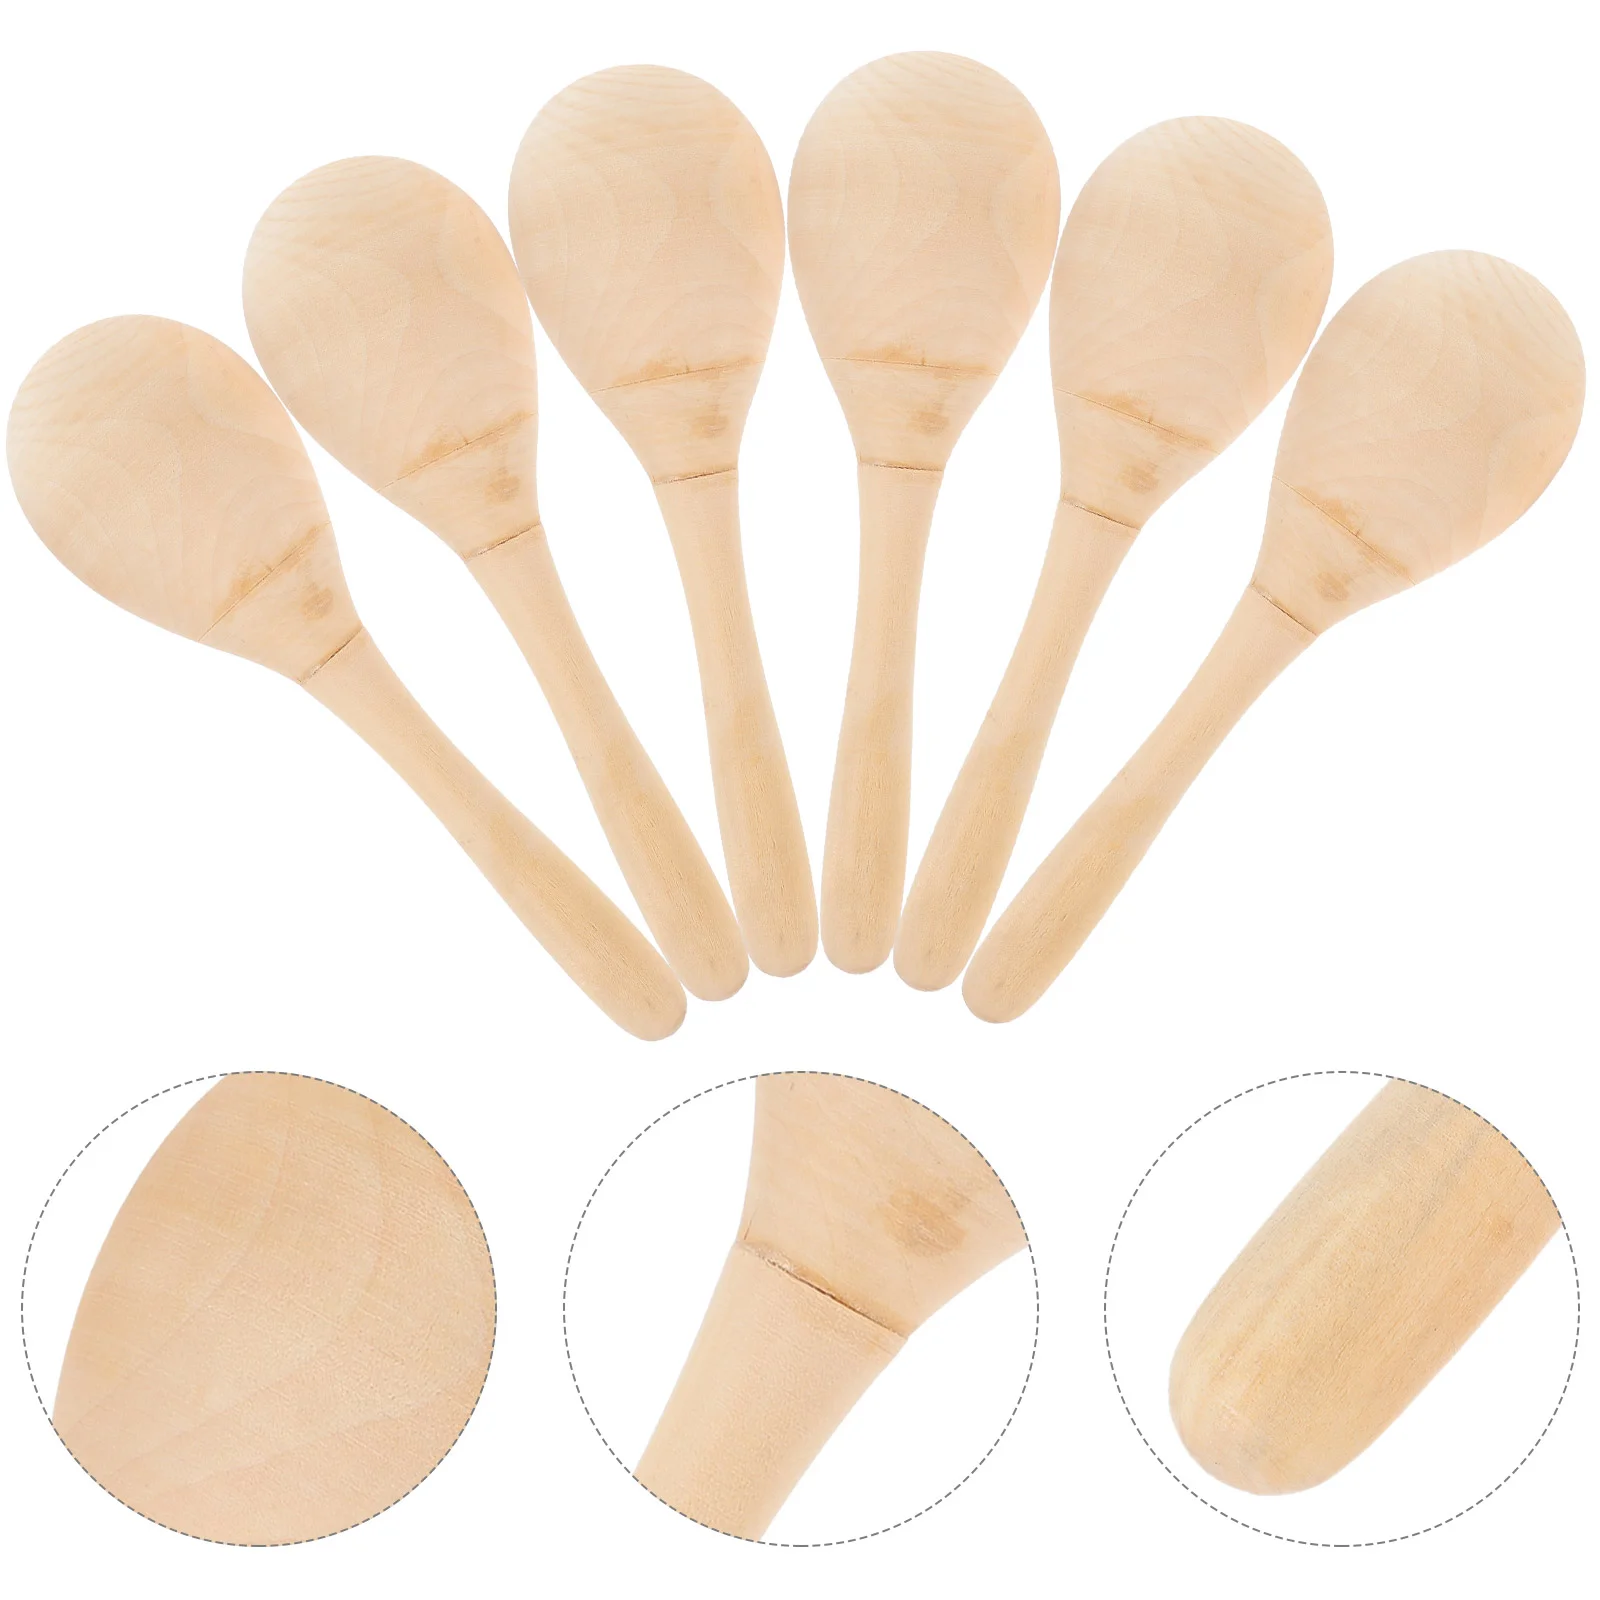 

6pcs DIY Wooden Maracas Unfinished Musical Instrument Blank Sand Hammers